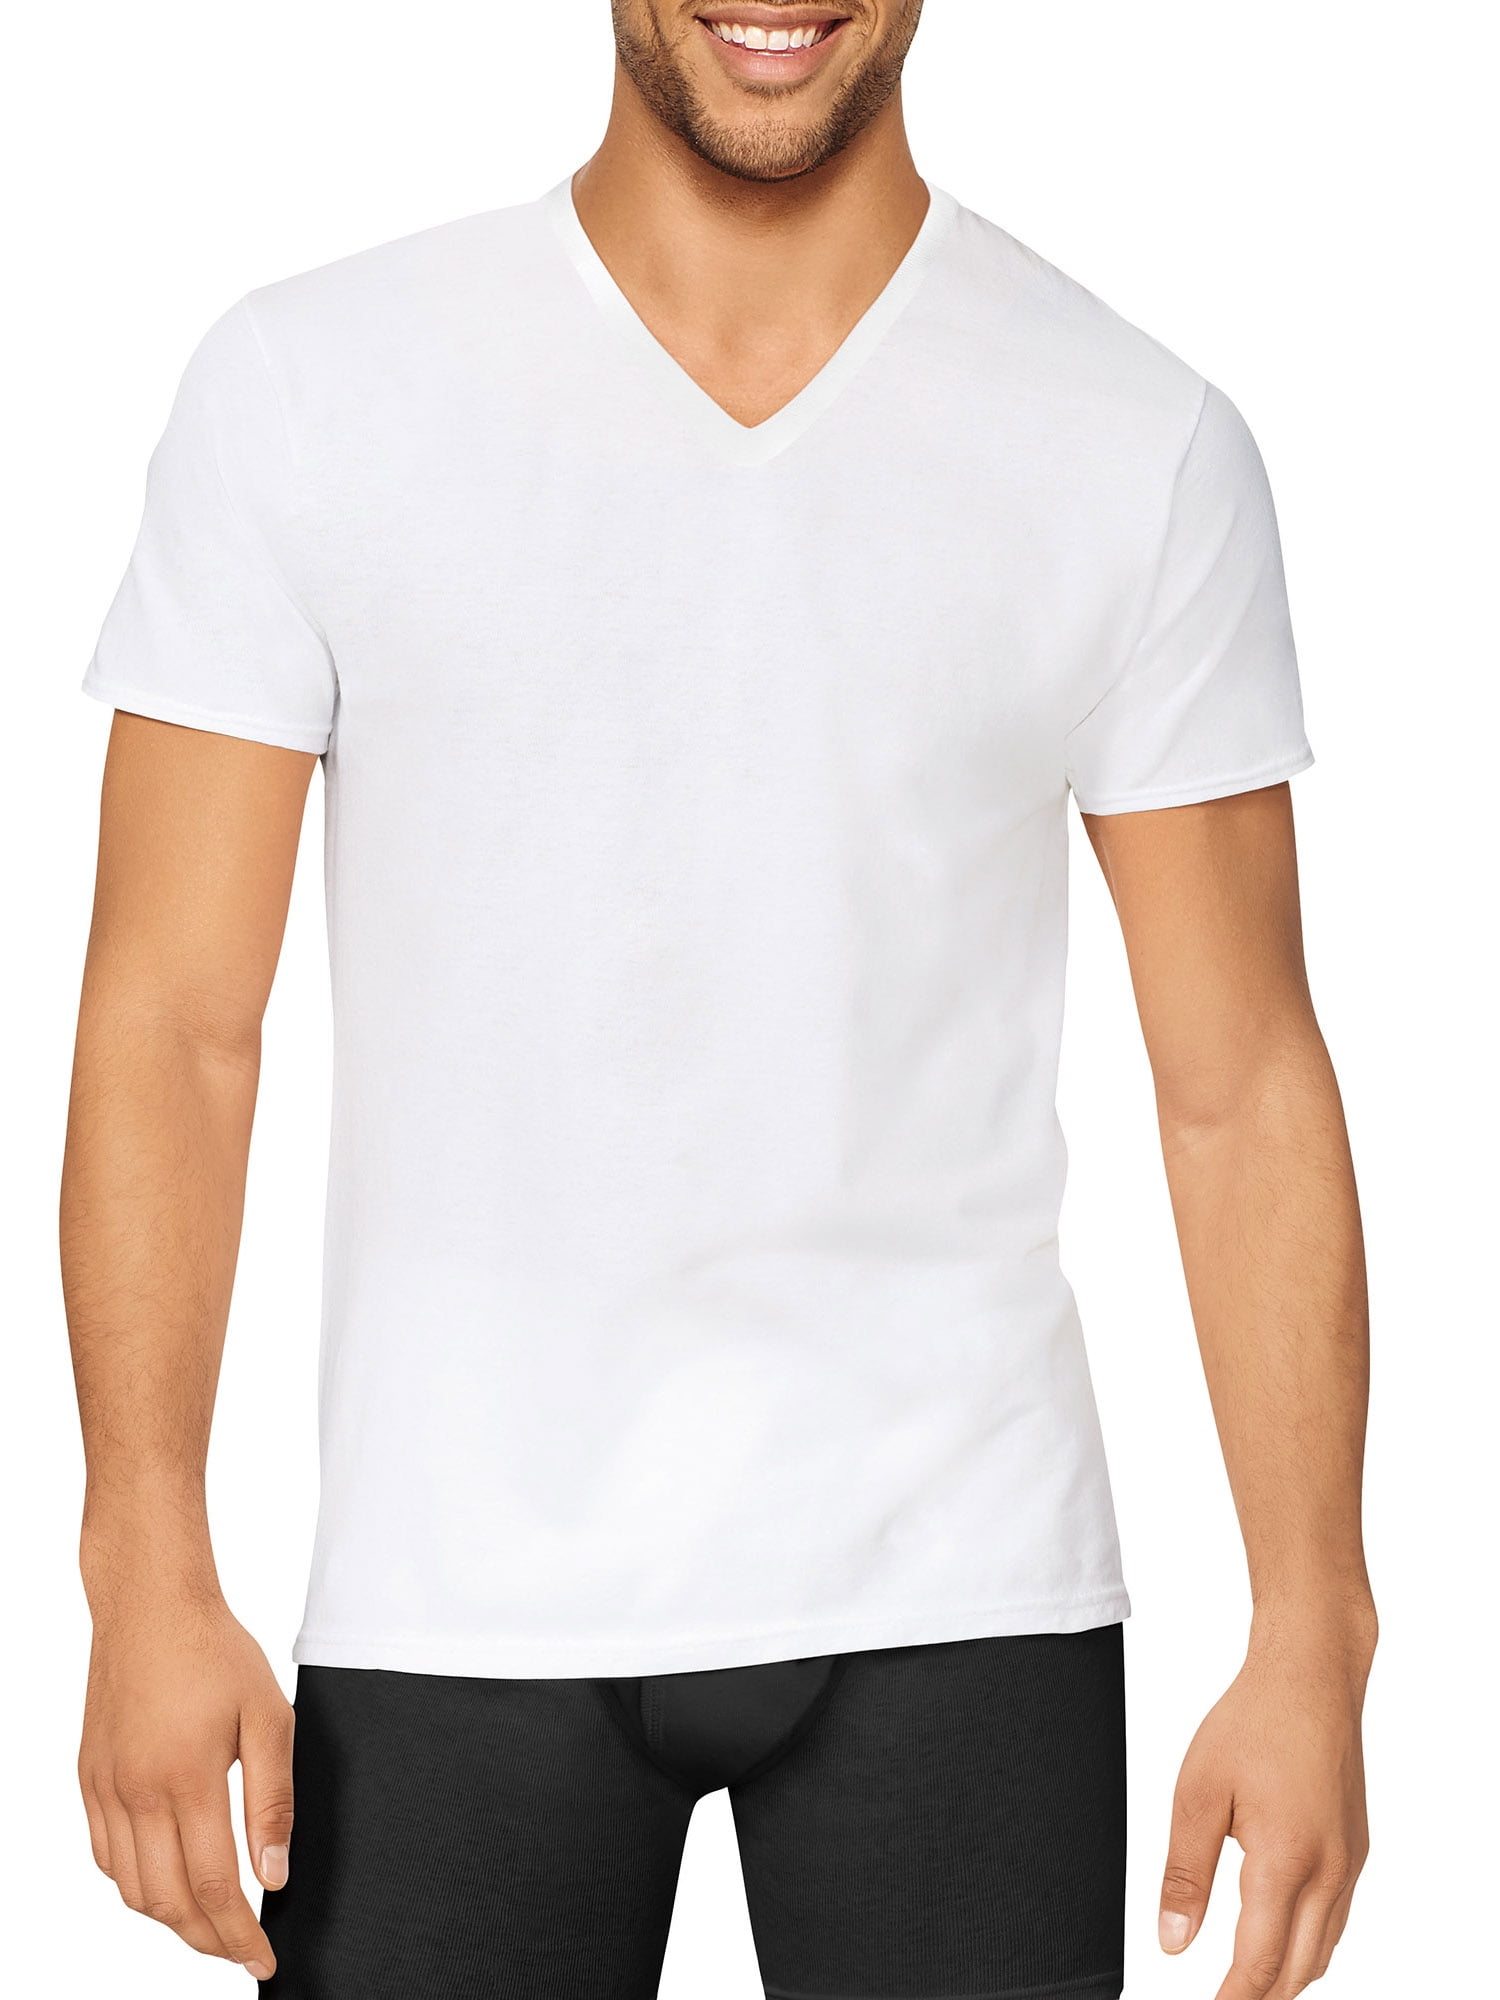 Details about   MEN'S 4 WHITE V-NECK T-SHIRTS by HANES 100% COTTON UNDERSHIRTS SIZE XL COOL NEW